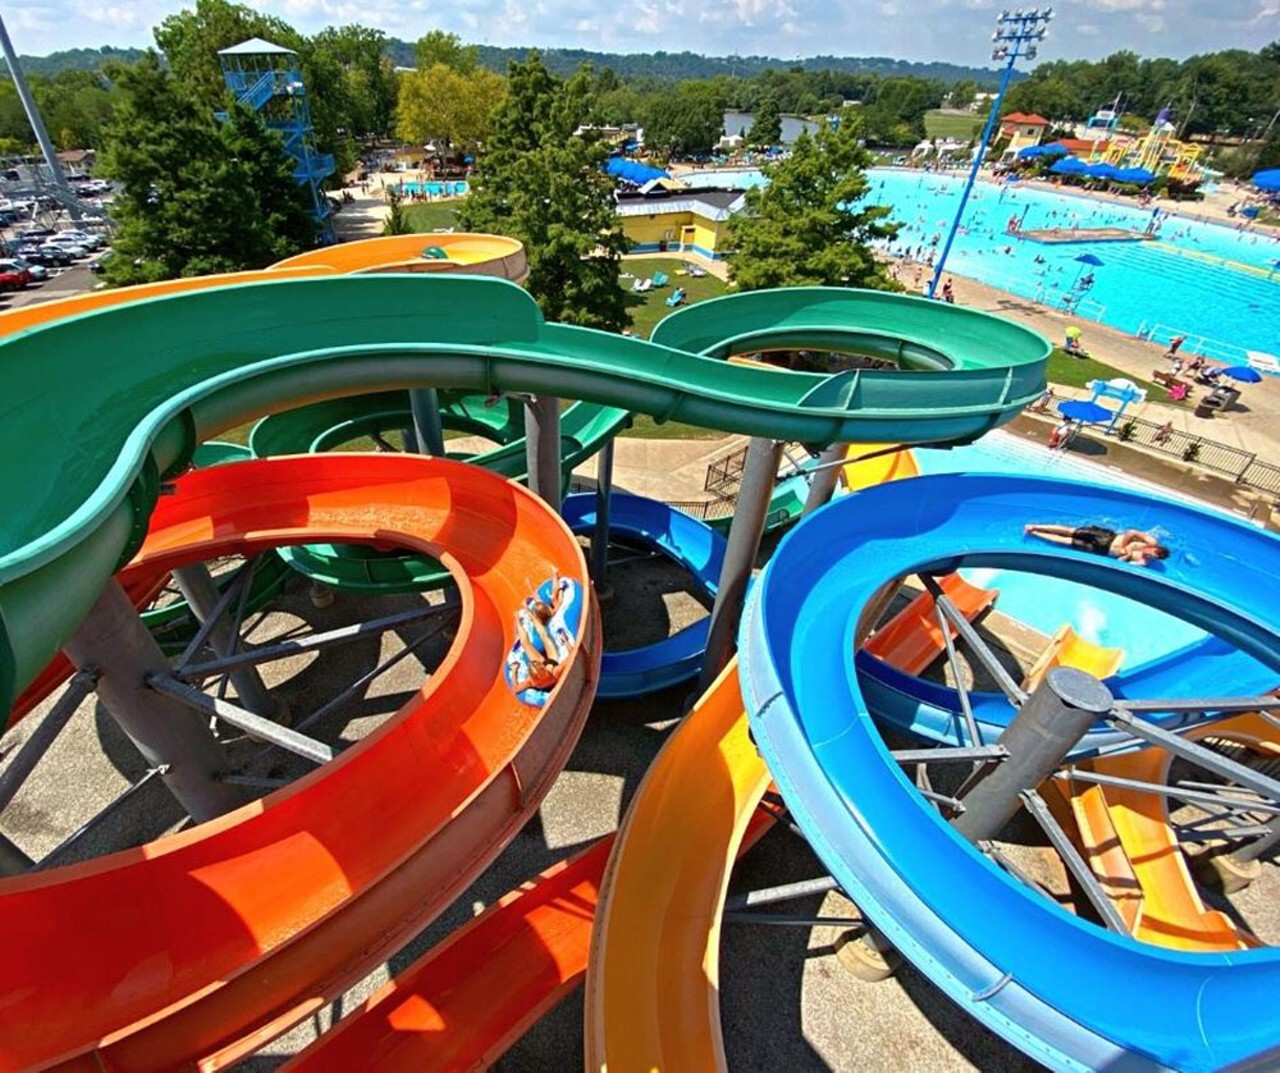 Make a Splash at Coney Island (CLOSED)
6201 Kellogg Ave., Anderson Township
At Coney Island, you can take a dip in Sunlite Pool, zip down the numerous waterslides or compete against friends and family in the Challenge Zone – the largest Aquaglide pool obstacle course in the country. There’s also tons of fun to be in Action Alley, which features a giant, inflatable obstacle course, inflatable axe-throwing and arts and crafts. You can also challenge each other on the mini-golf course or take a leisurely glide around Lake Como in the Storybook Paddle Boats.